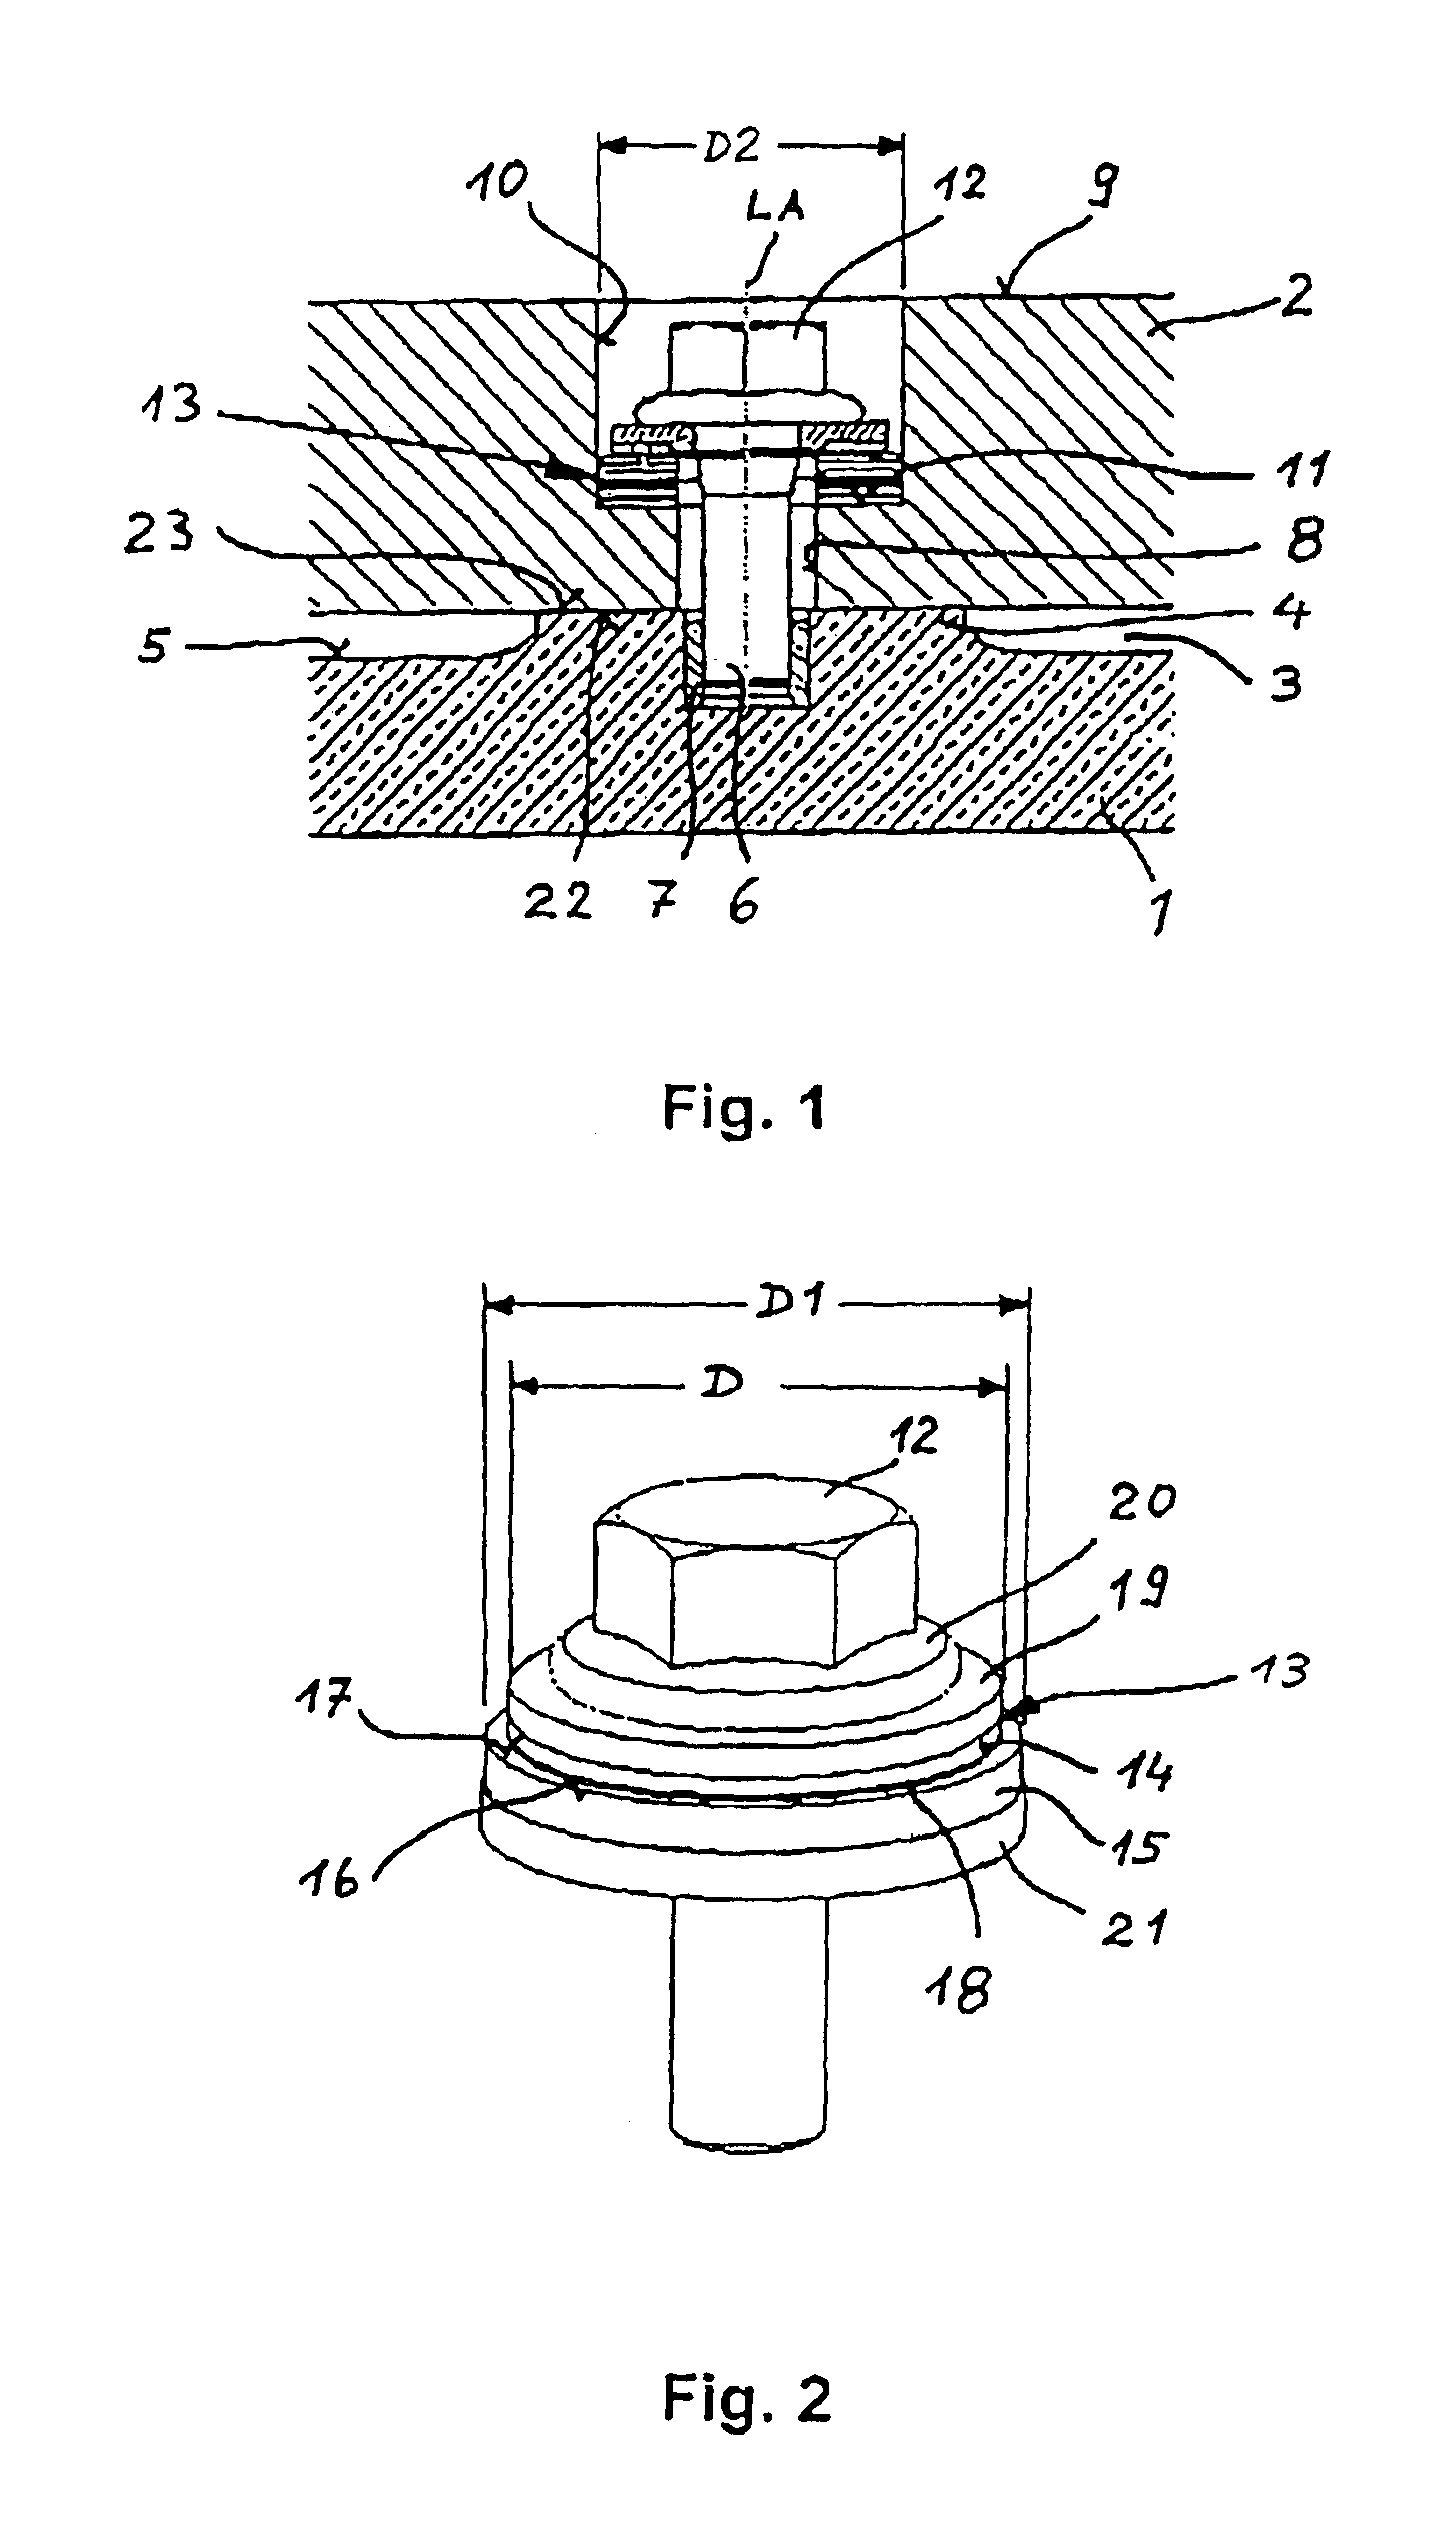 Liquid-cooled mold for the continuous casting of metals